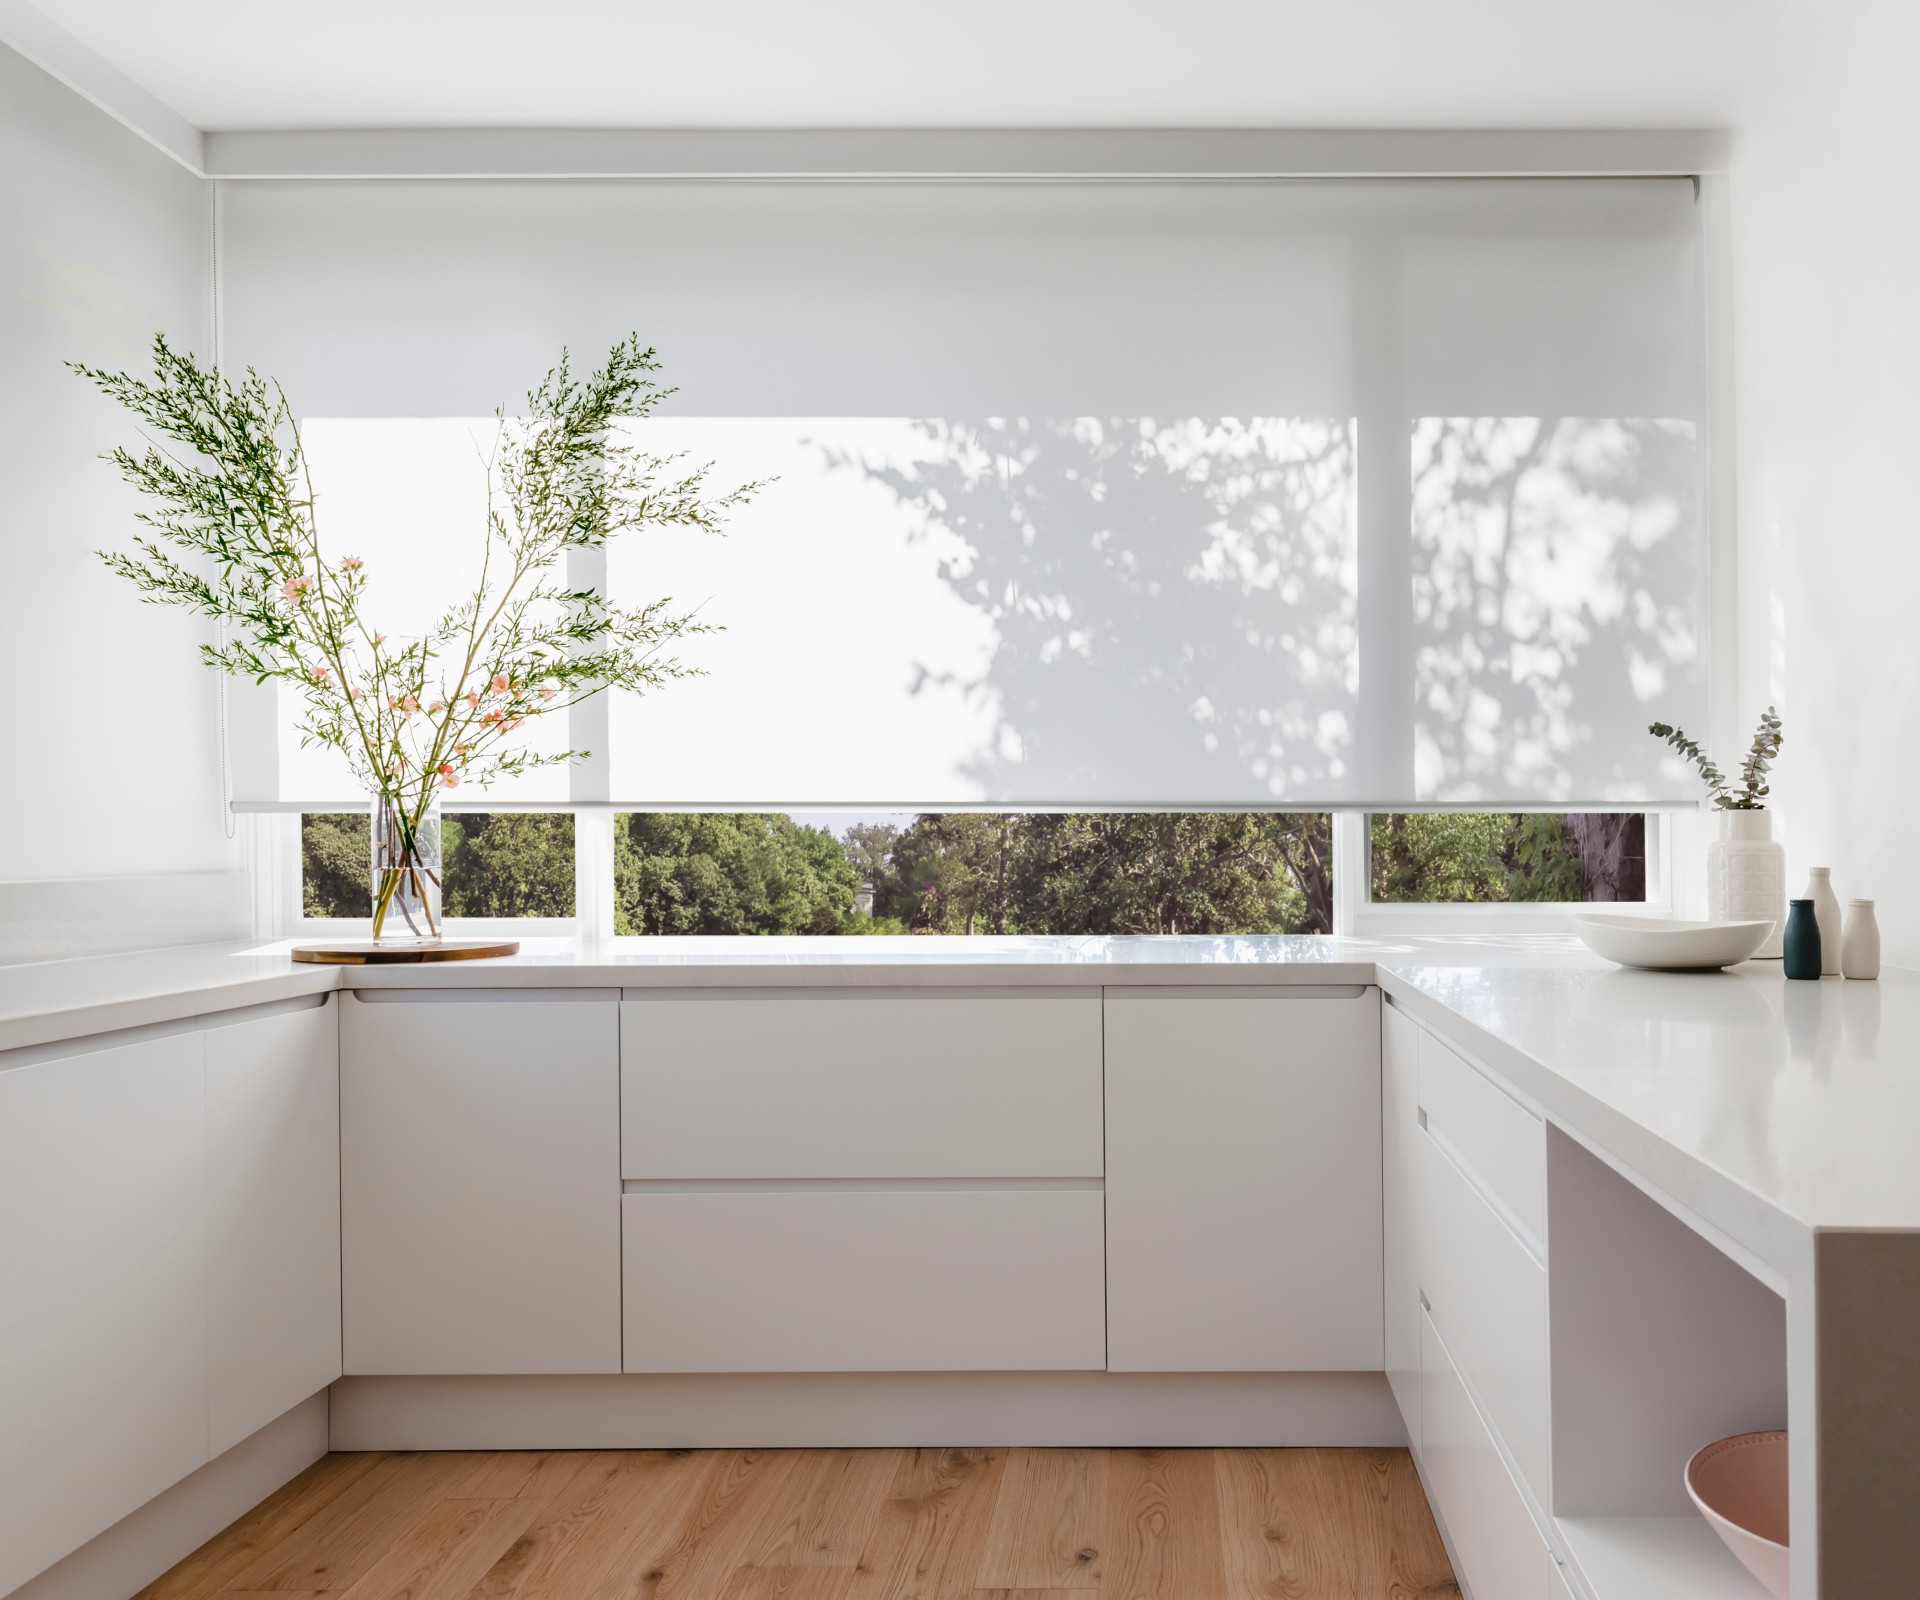 Bright kitchen with white fronts in front of large window with half closed sunshade